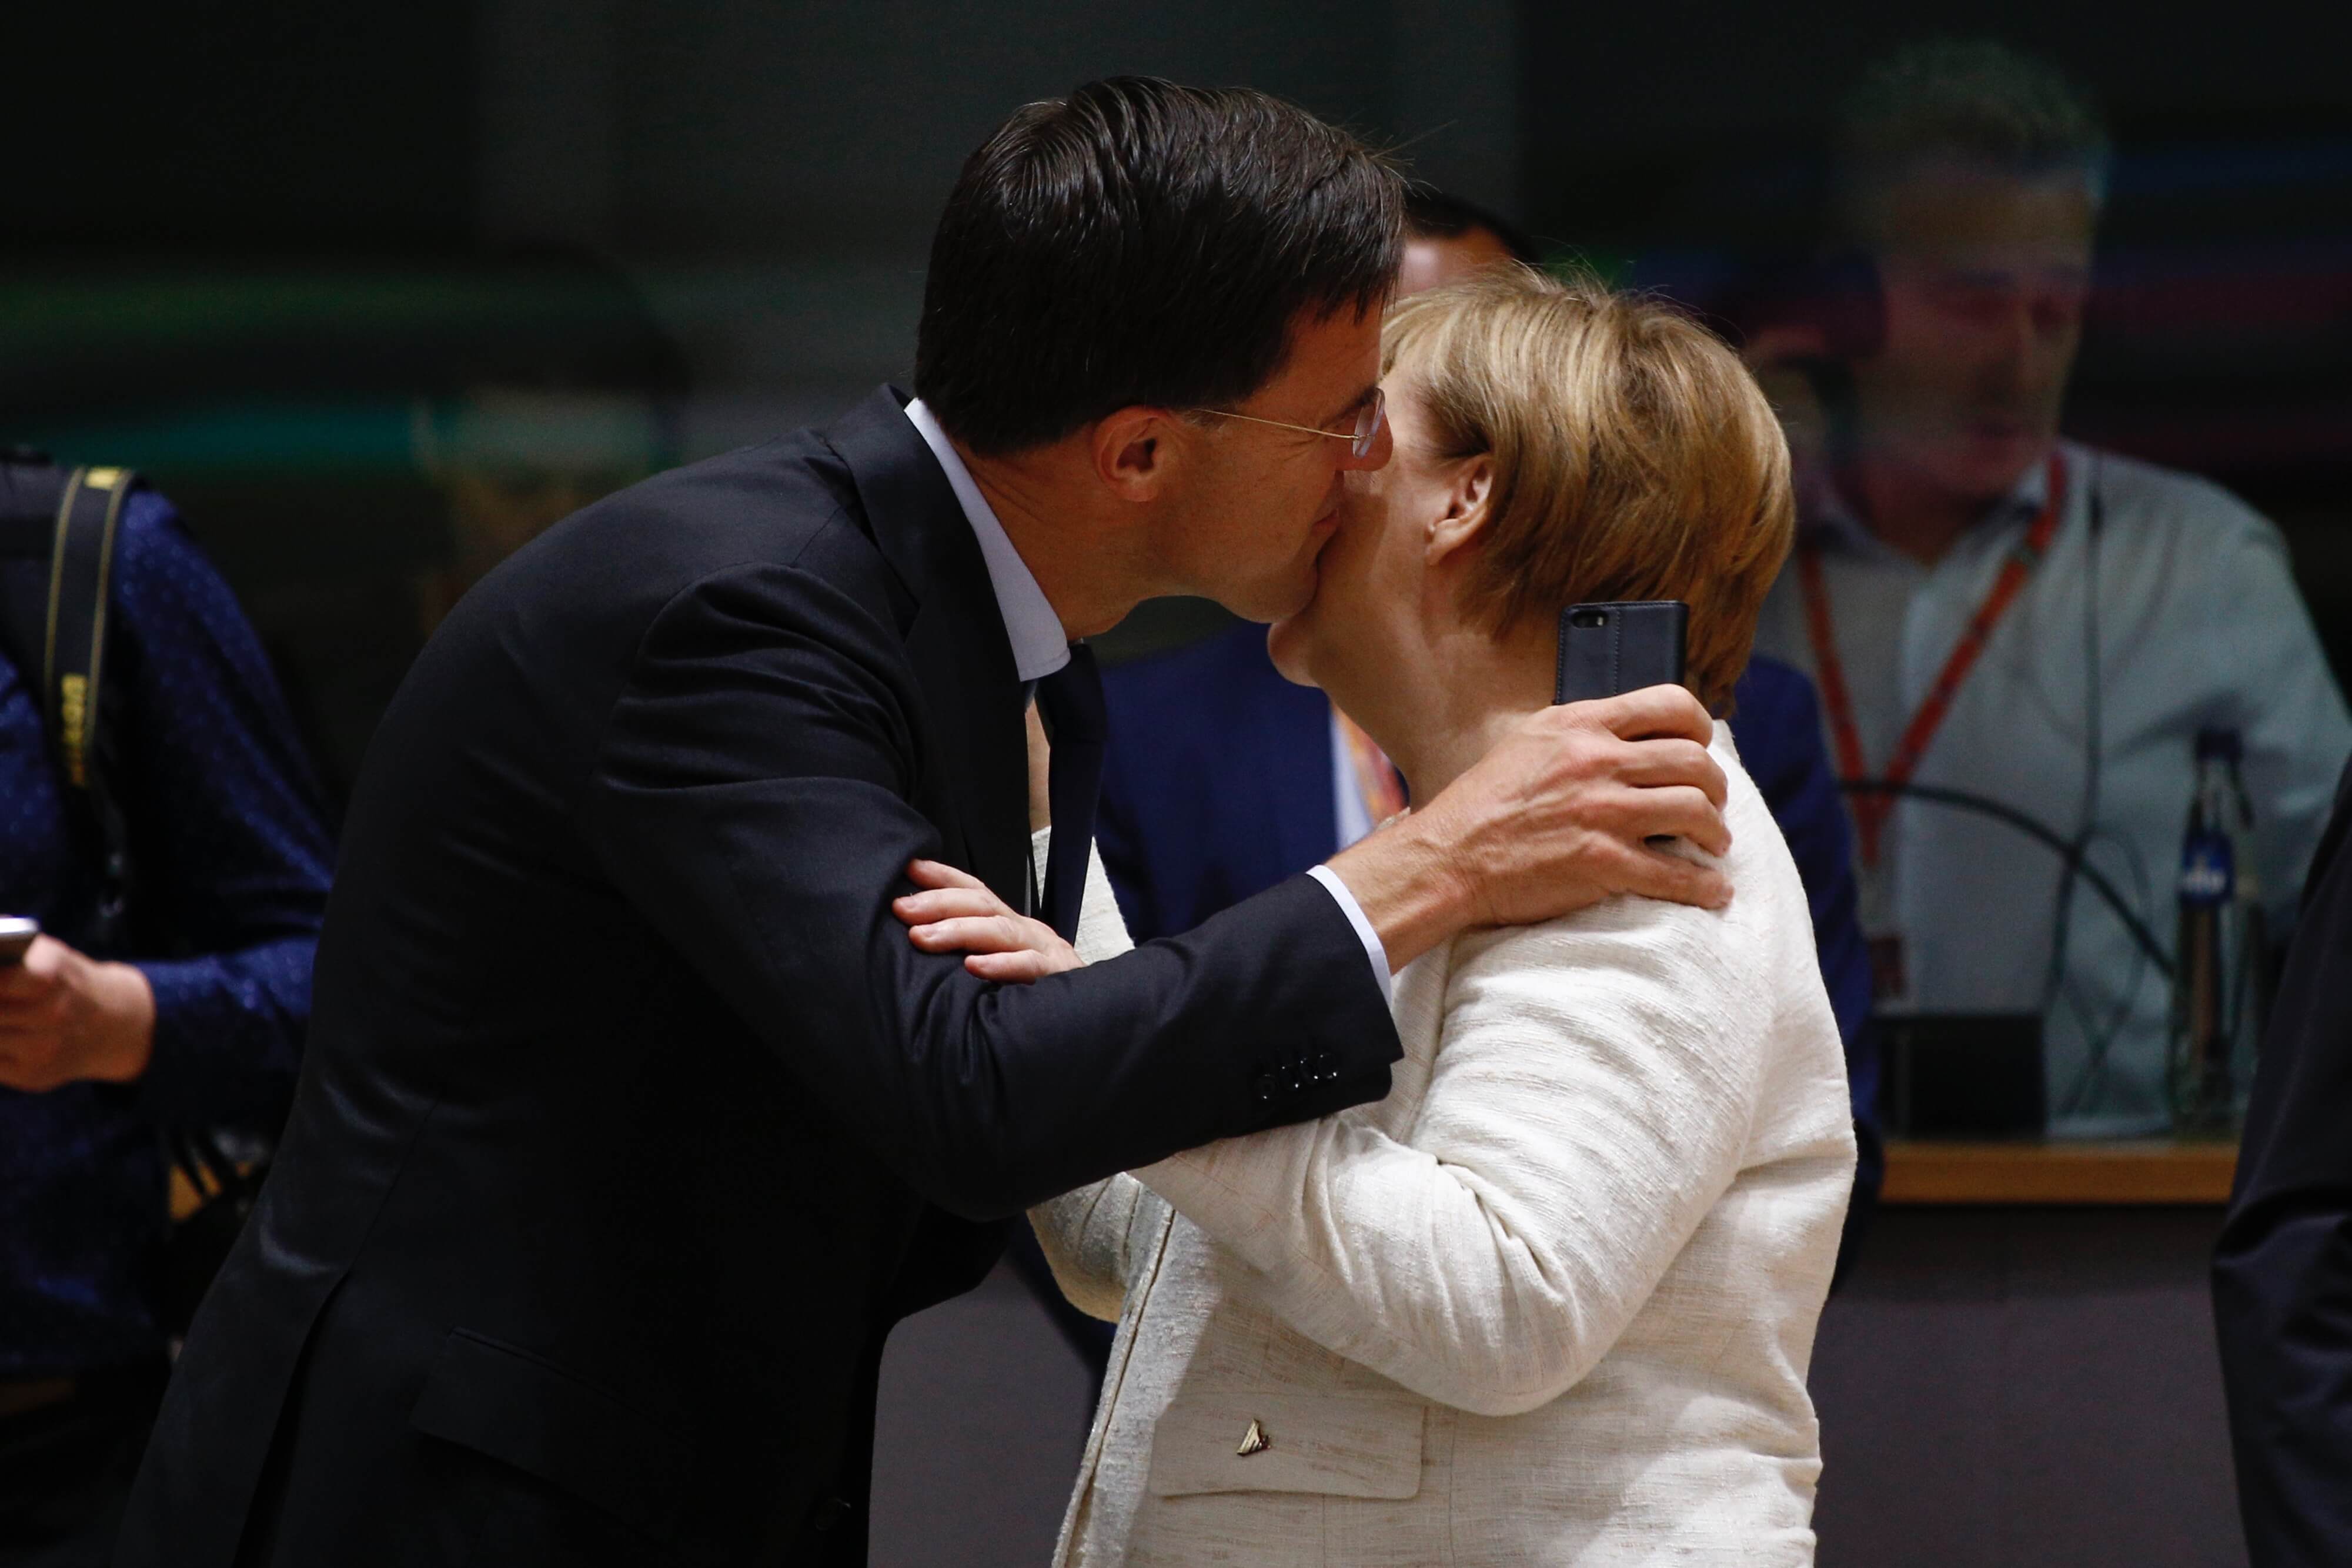 Jurgens - Dutch Prime Minister Mark Rutte with Angela Merkel at the European Council in Brussels in 2018. European Union